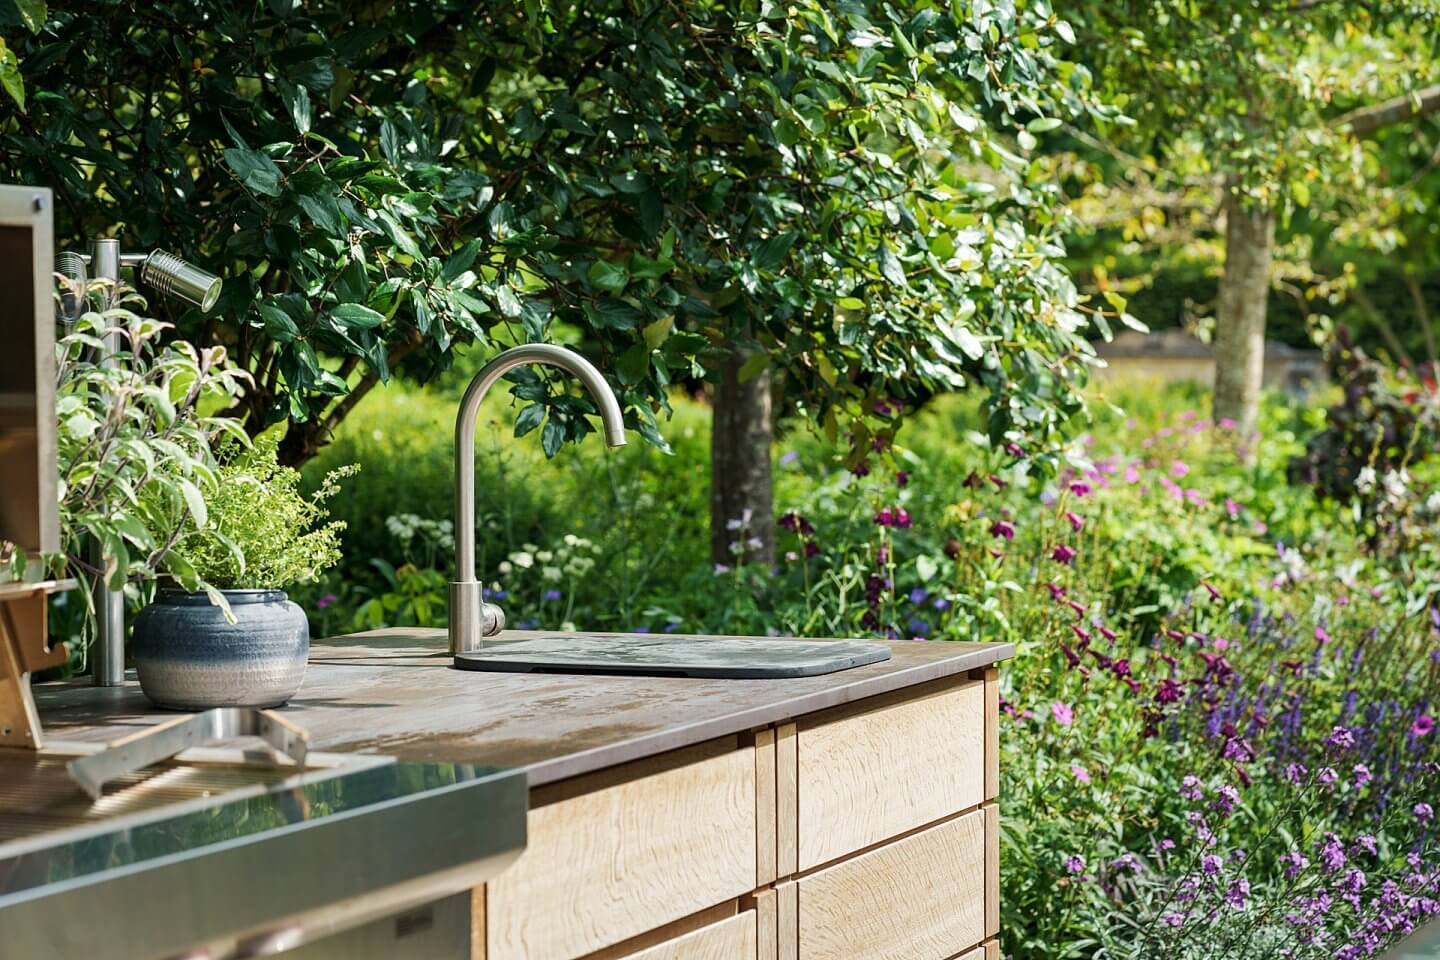 details of outdoor kitchen in a country garden UK